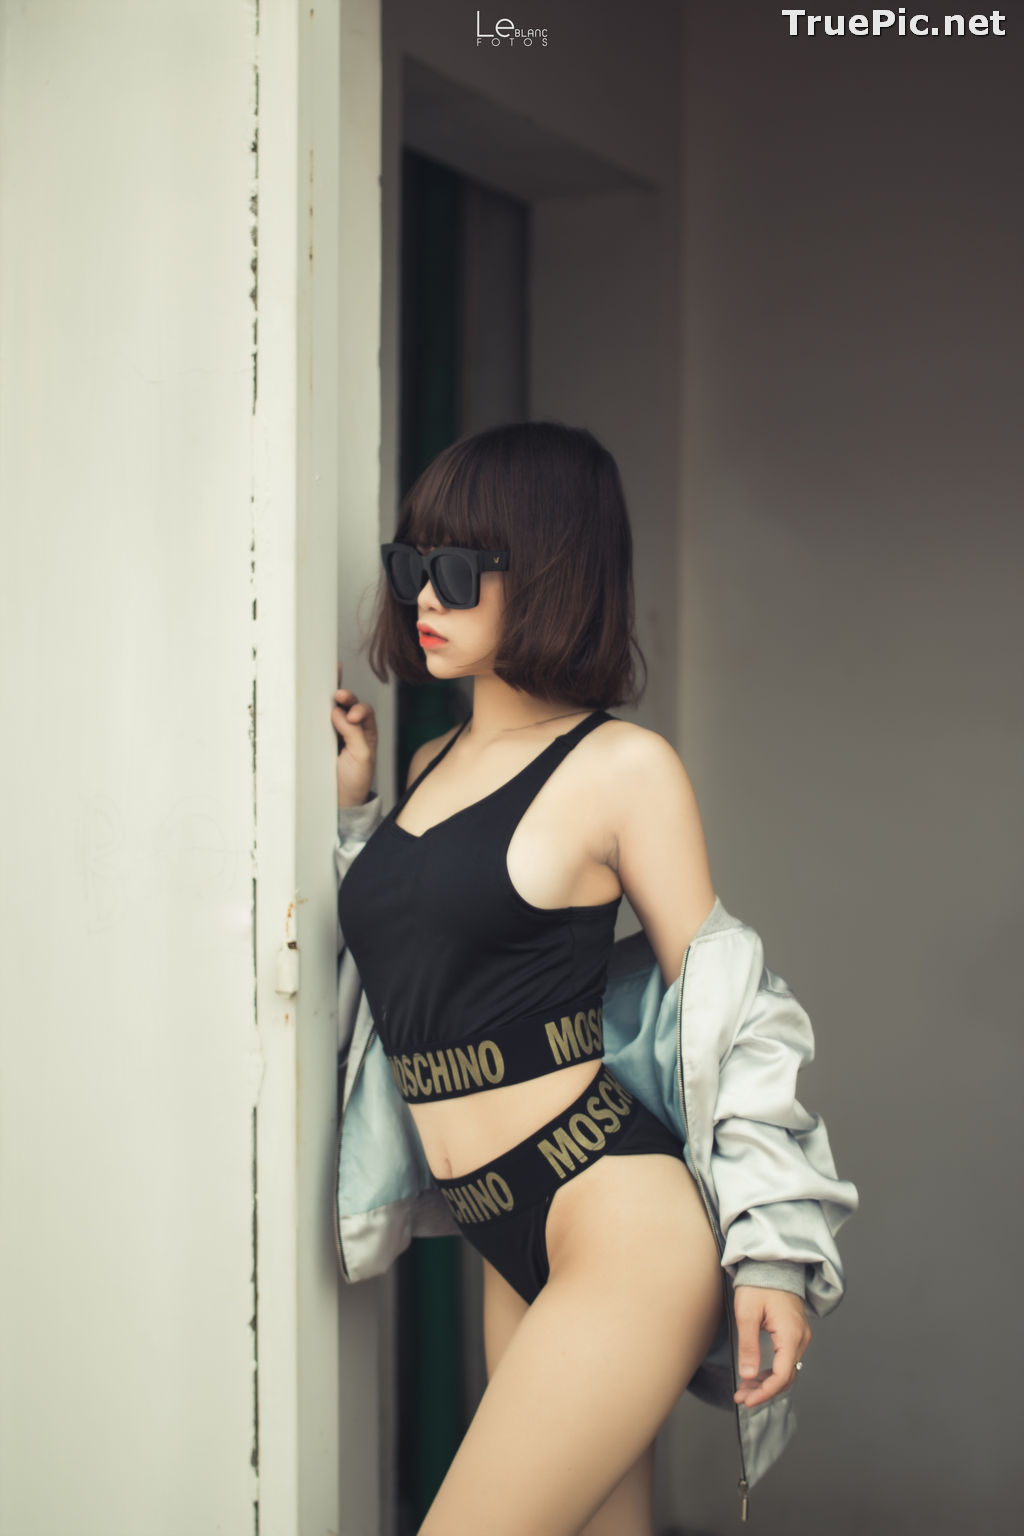 Image Vietnamese Beauties With Lingerie and Bikini – Photo by Le Blanc Studio #14 - TruePic.net - Picture-16